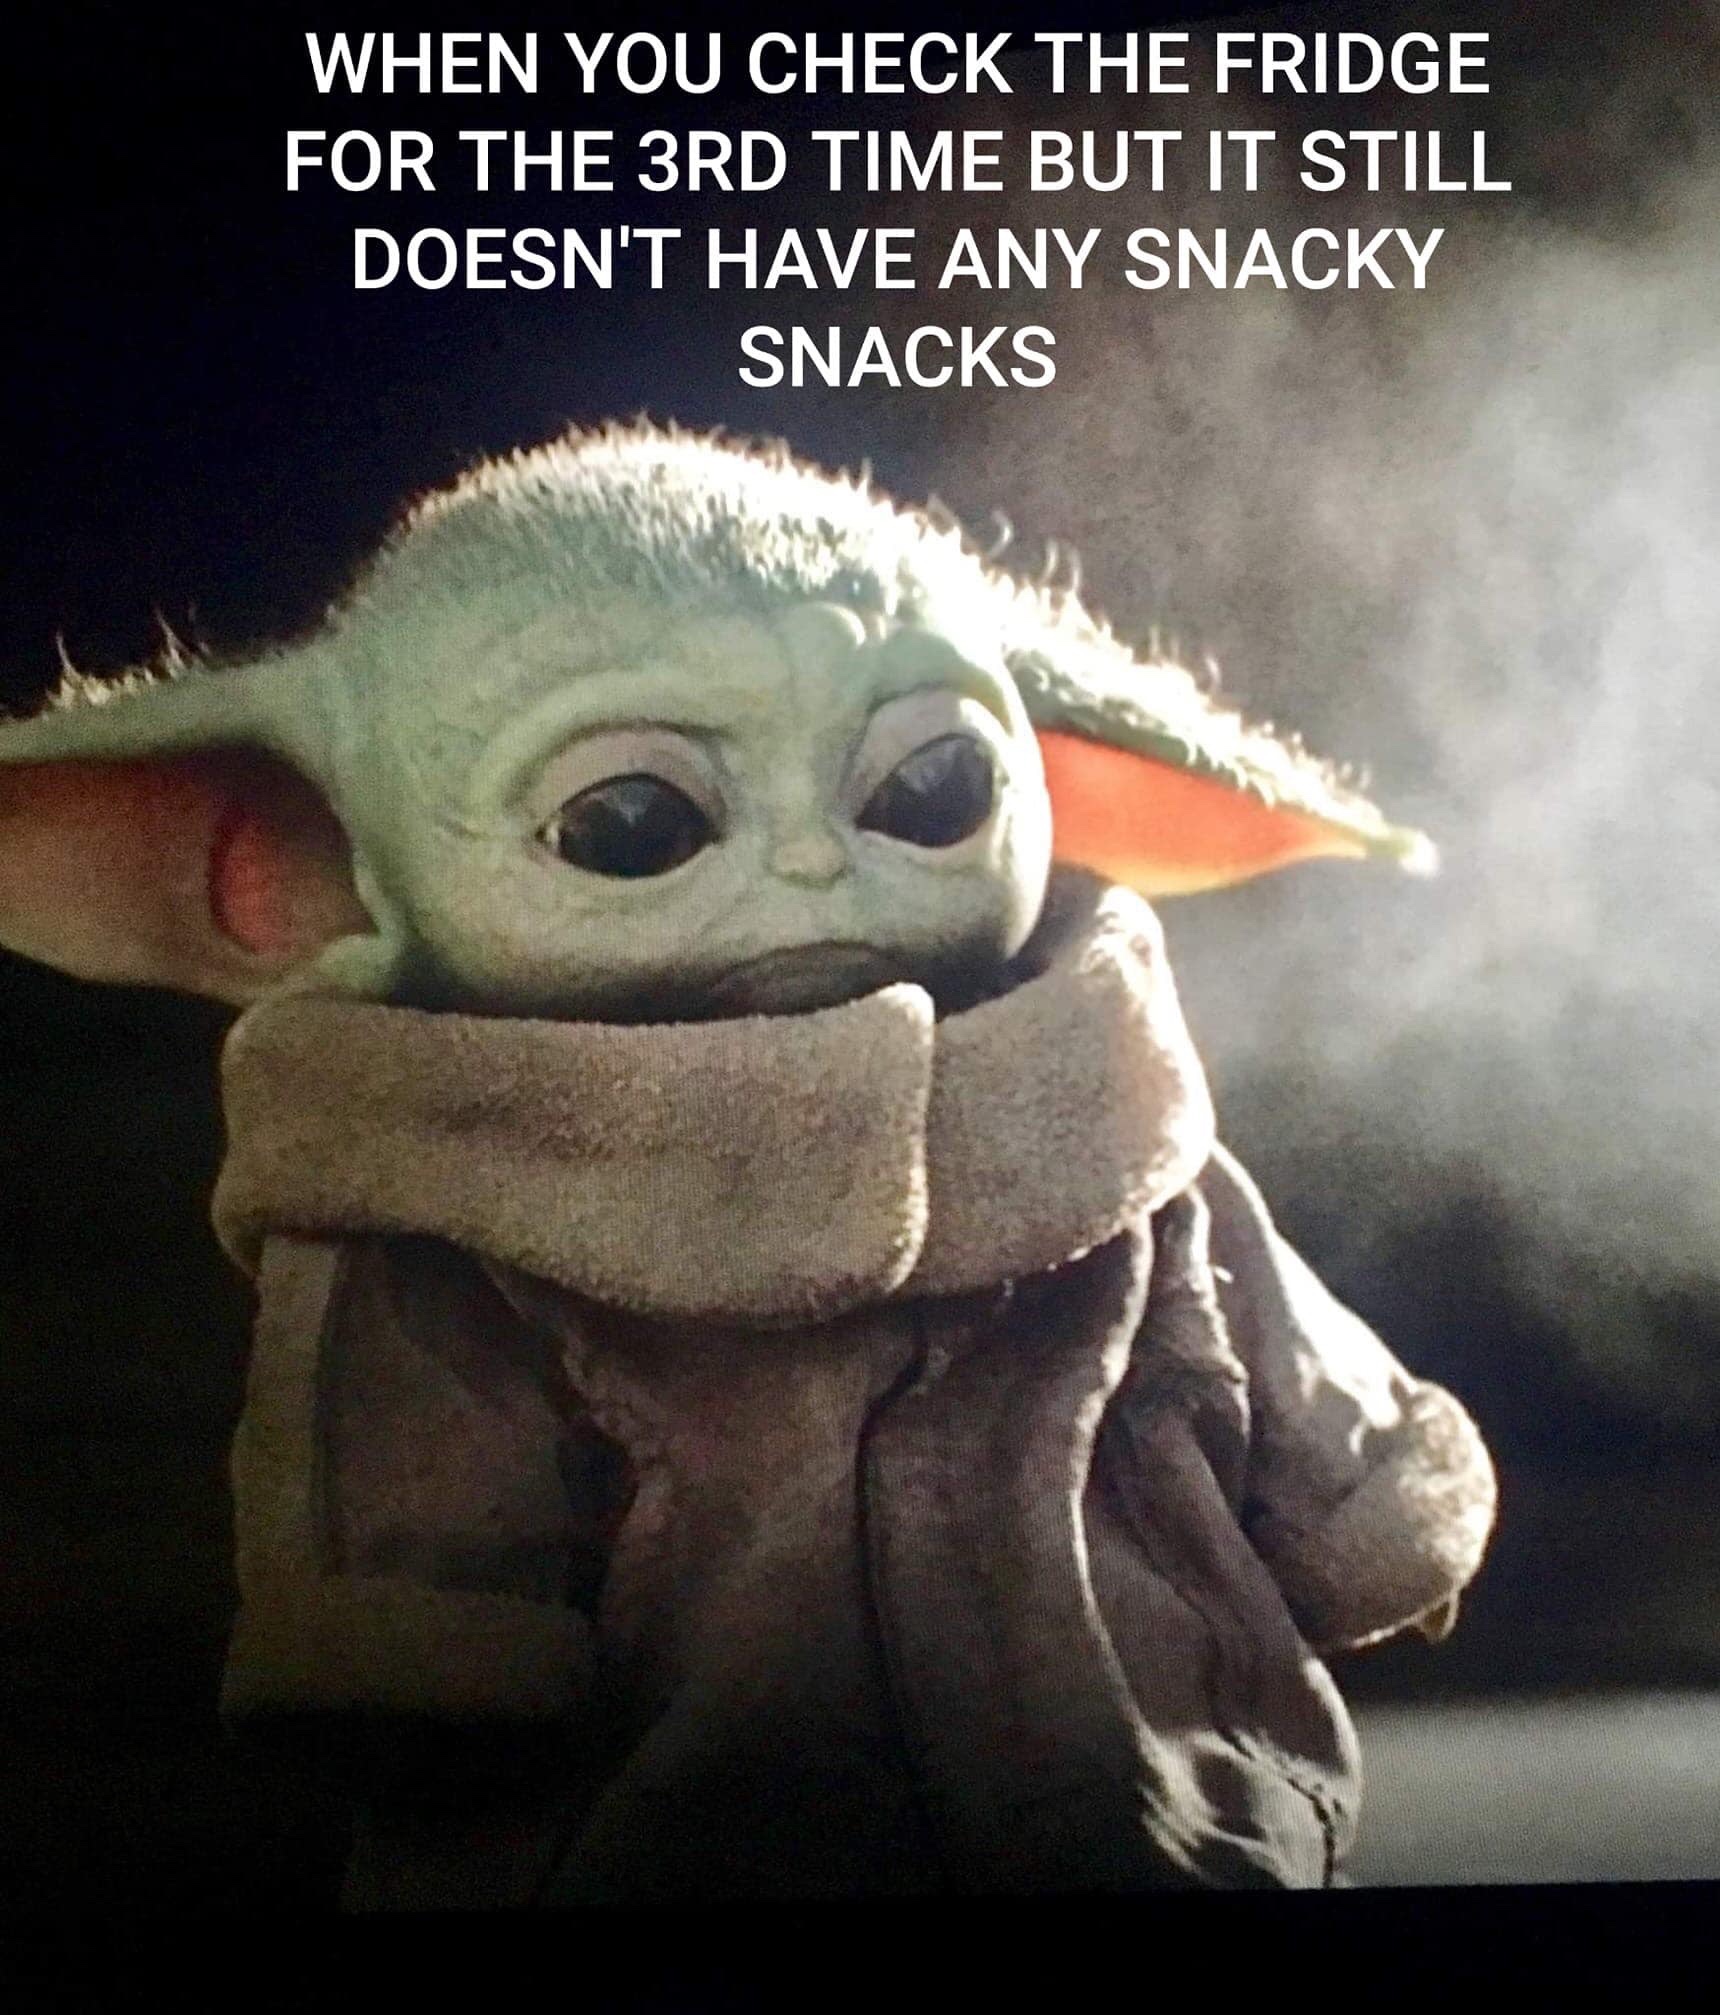 Yoda - When You Check The Fridge For The 3RD Time But It Still Doesn'T Have Any Snacky Snacks